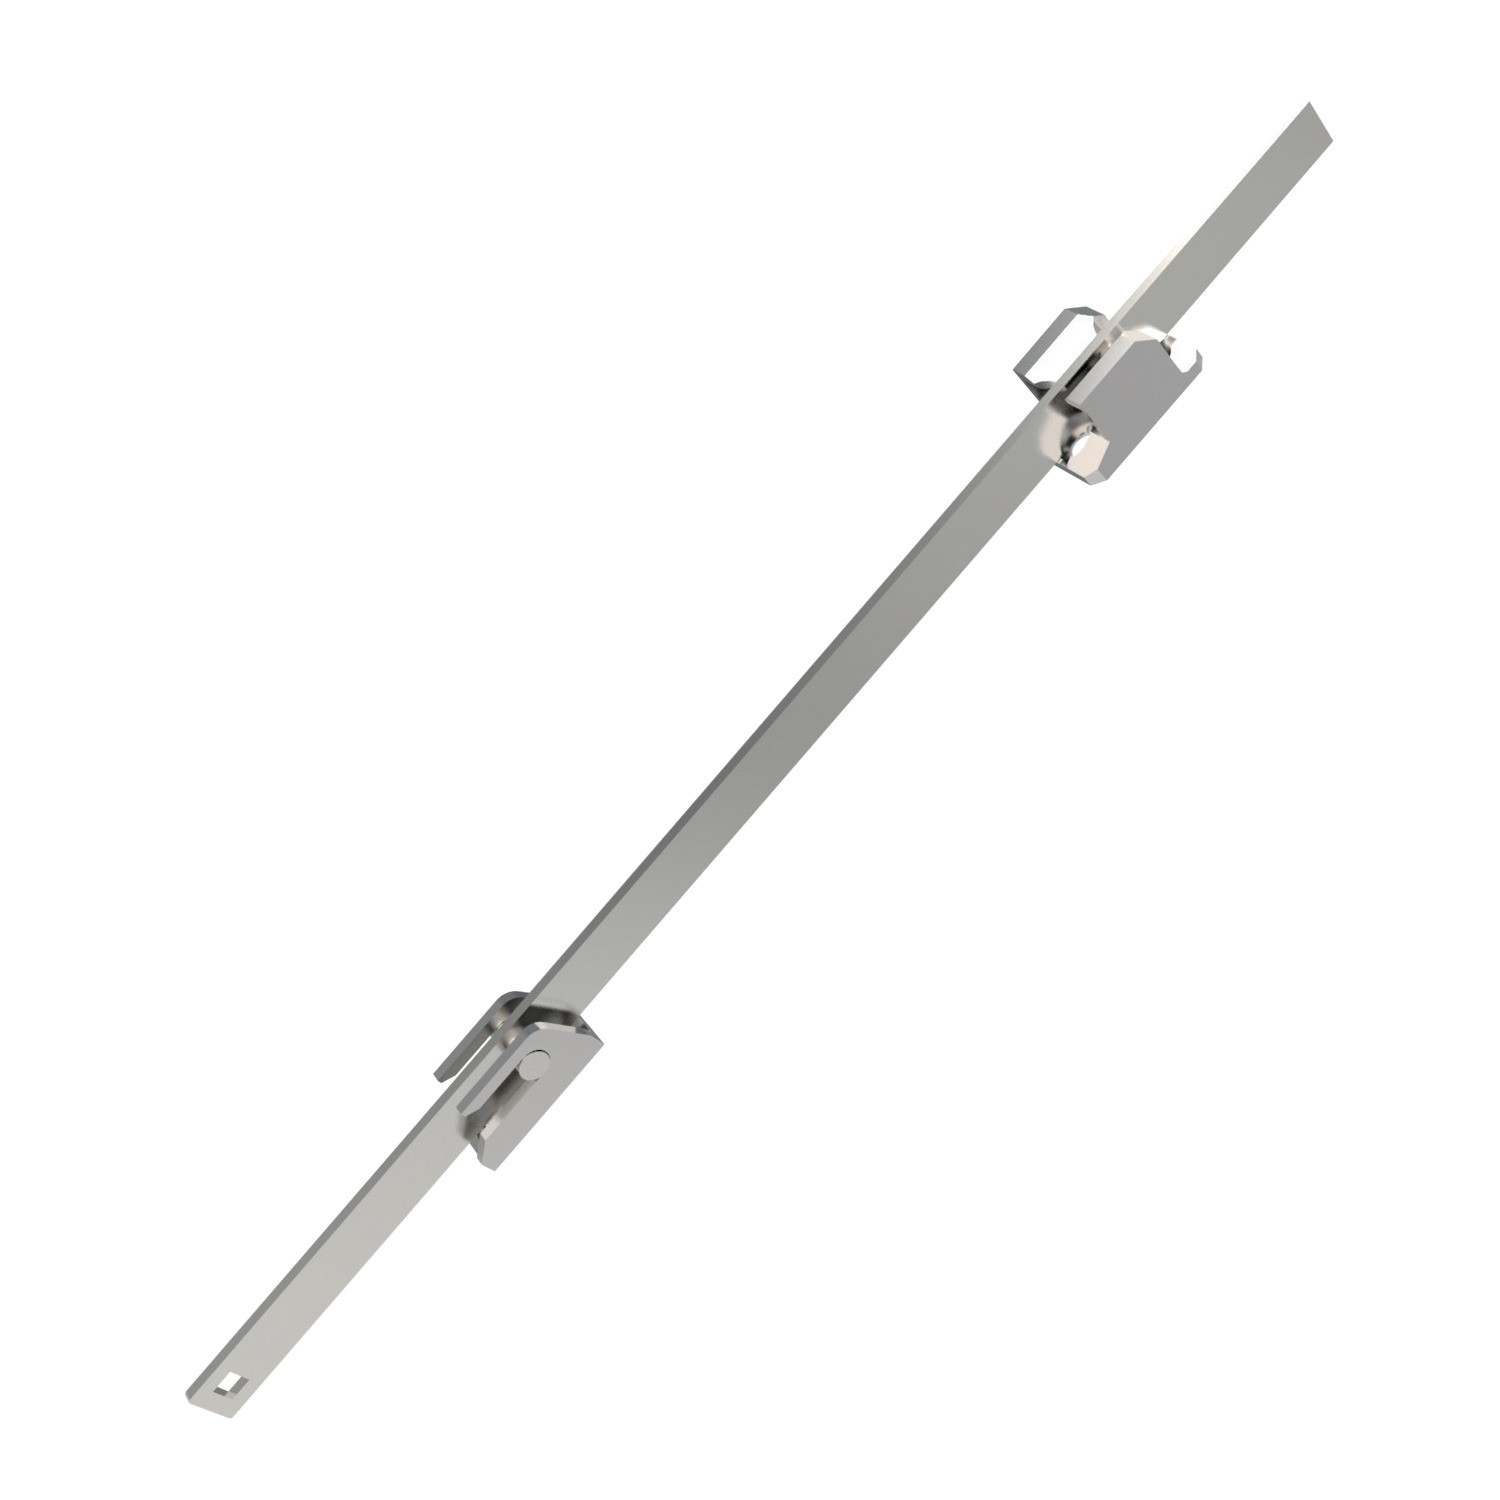 Multi-Point Latching Set A flat rod with locking pins multi-point latching set. Rods are made from zinc plated steel, rod guides polyamide and rod catchers die cast zinc.